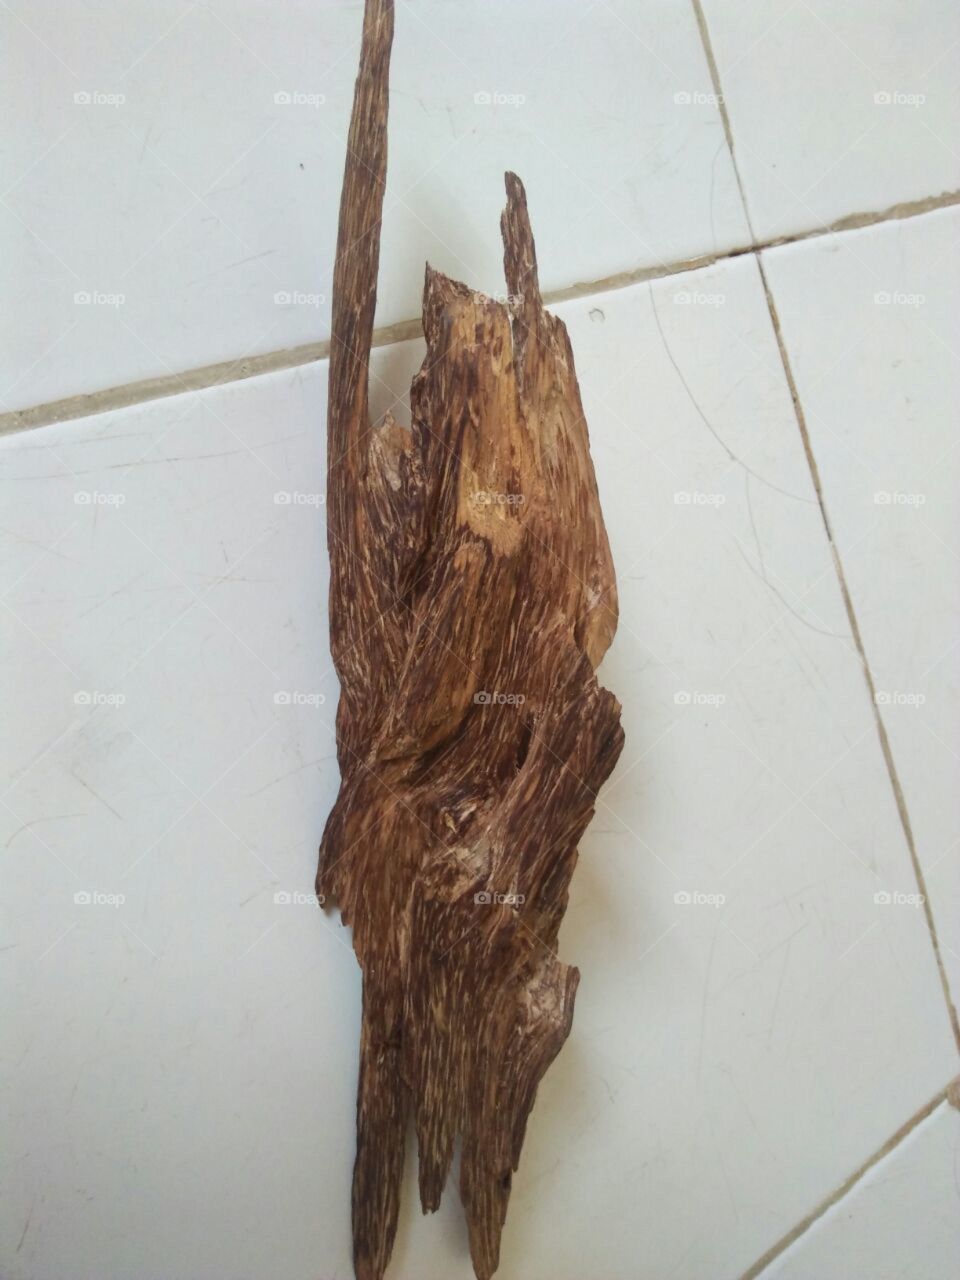 This agarwood from borneo